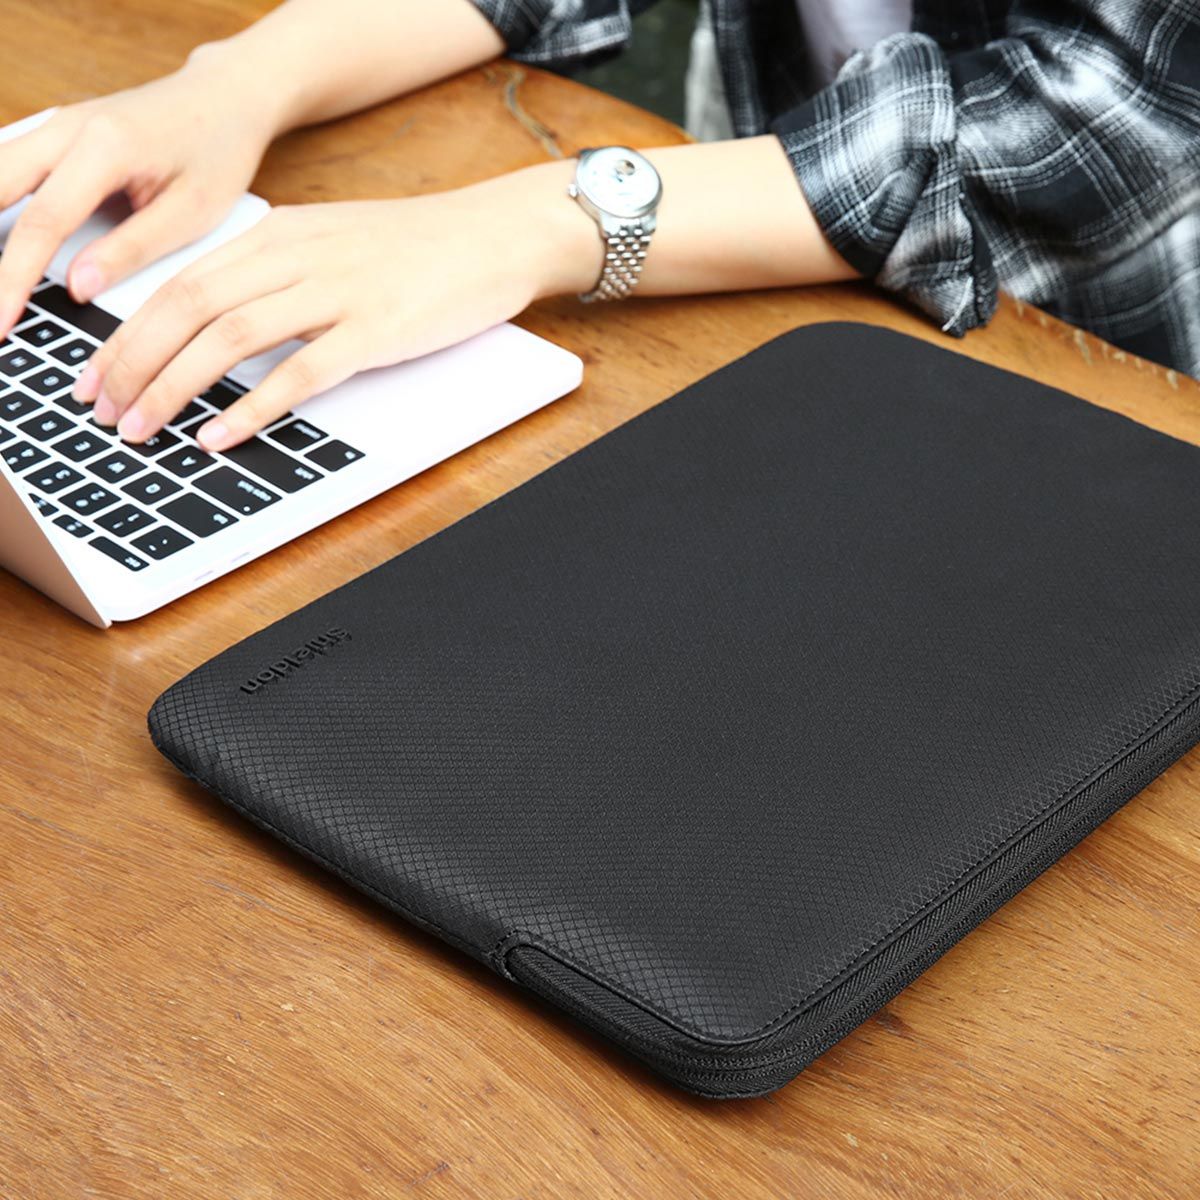 Laptop Shoulder Sleeve Bag for 13-13.3 inch MacBook Pro Dell,HP,Lenovo,Acer Notebook Computer,Gray GOOJODOQ 13-13.3 Inch Laptop Case MacBook Air